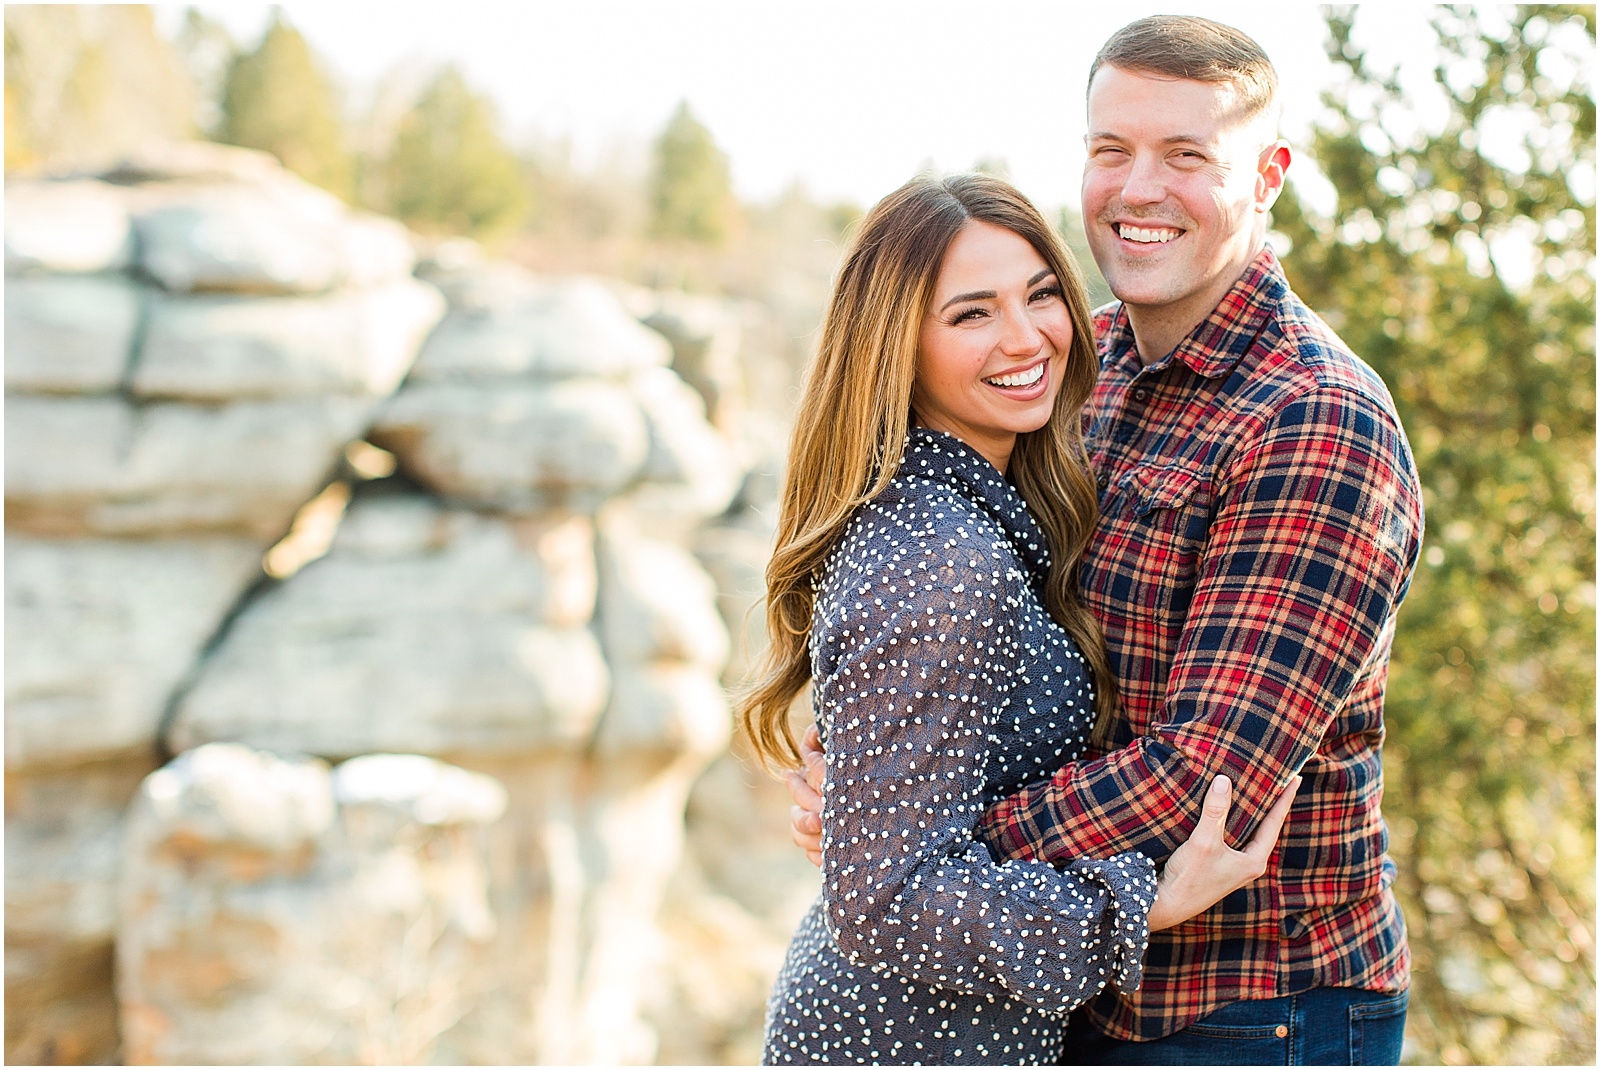 A Sunny Garden of the Gods Engagement Session | Shiloh and Lee | Bret and Brandie Photography001.jpg